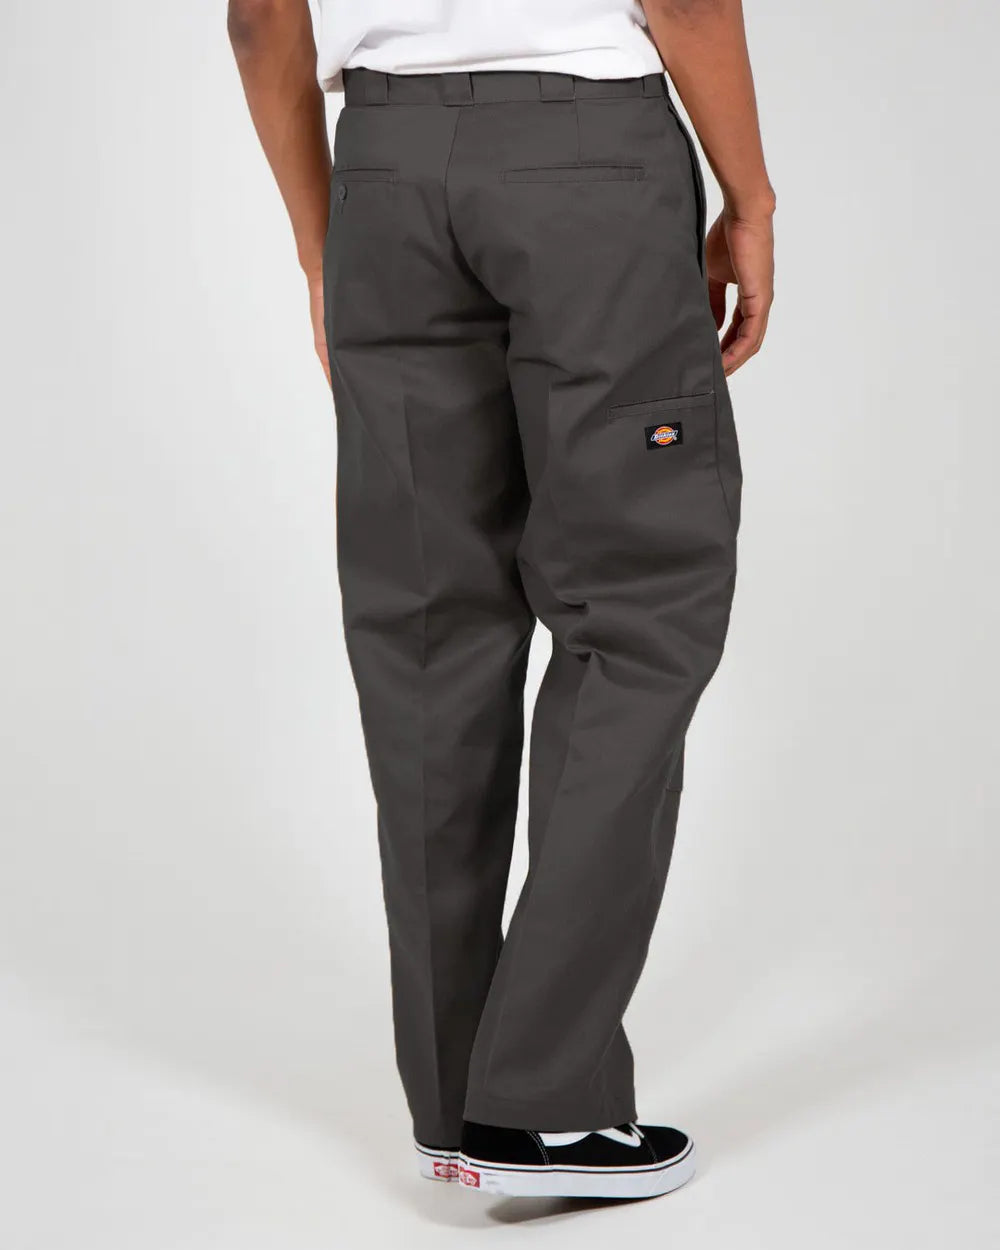 Loose Fit Double Knee Work Pant - Charcoal